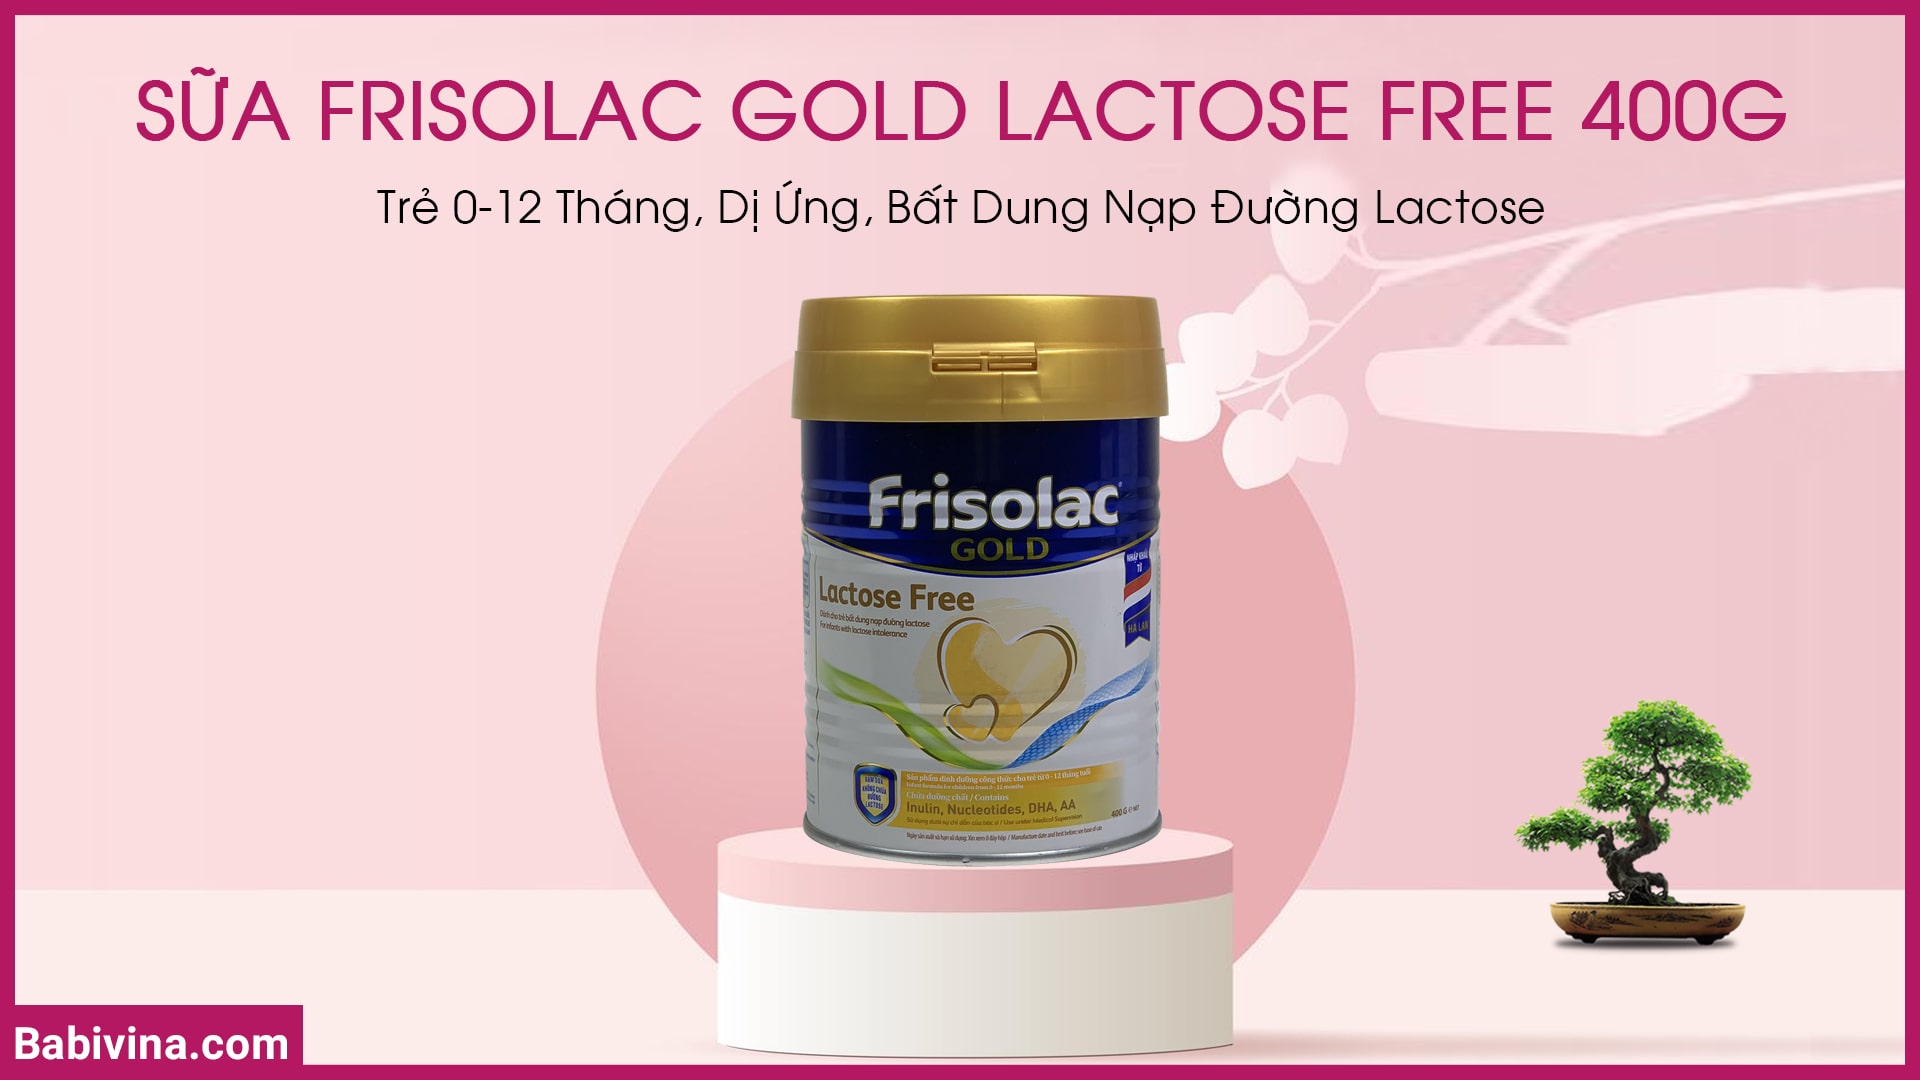 sua-frisolac-gold-lactose-free-400g-chinh-hang-gia-re-nhat